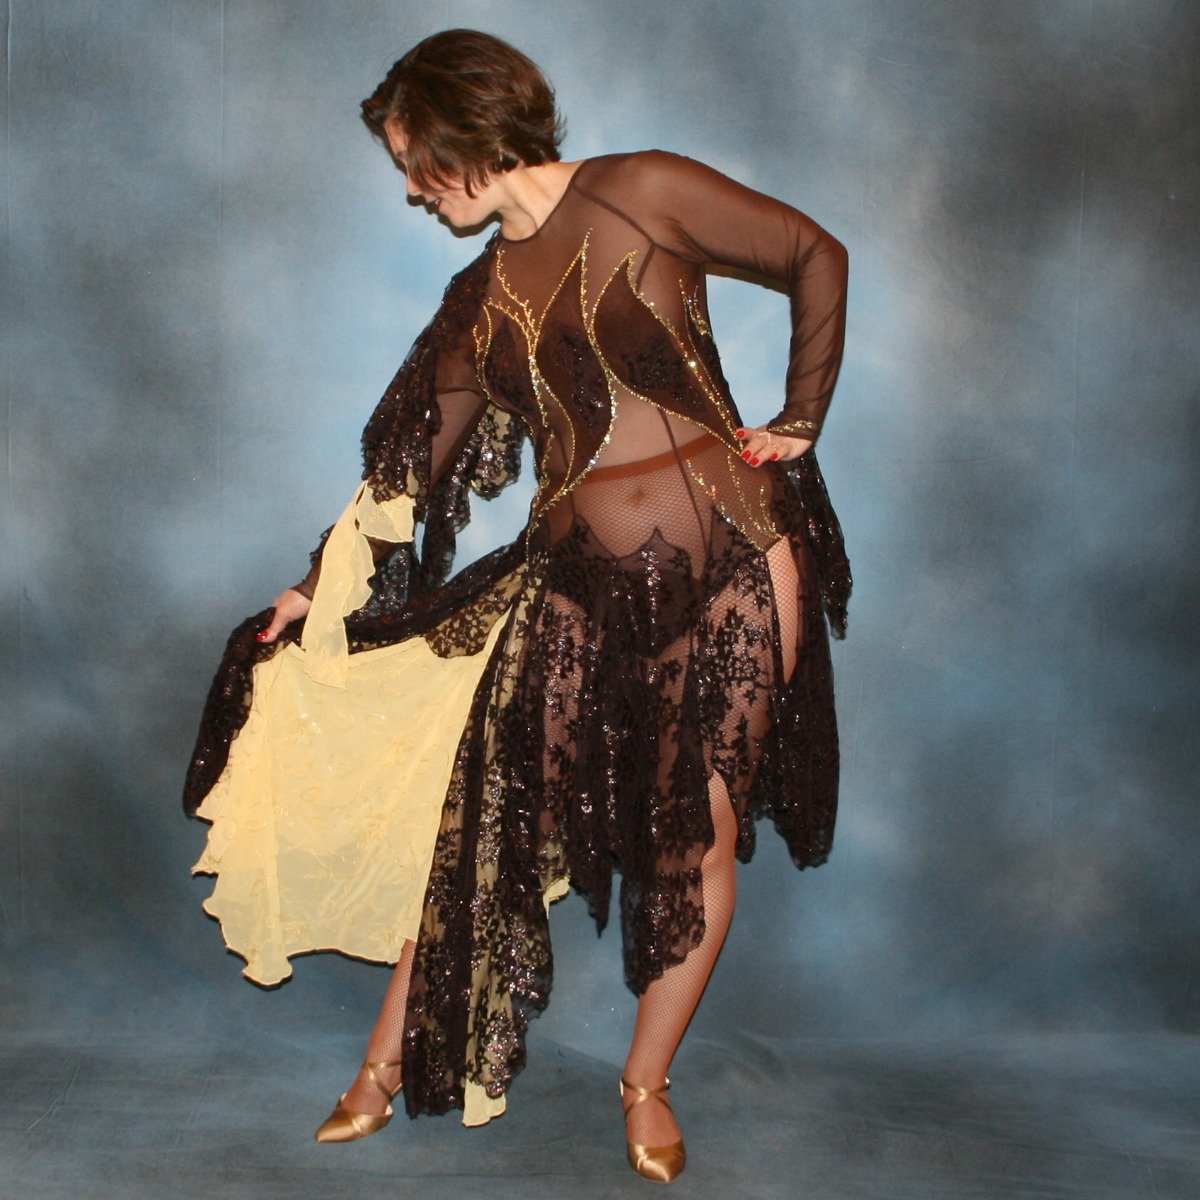 Crystal's Creations Gorgeous chocolate brown ballroom show dance dress created in luxurious chocolate brown metallic lace